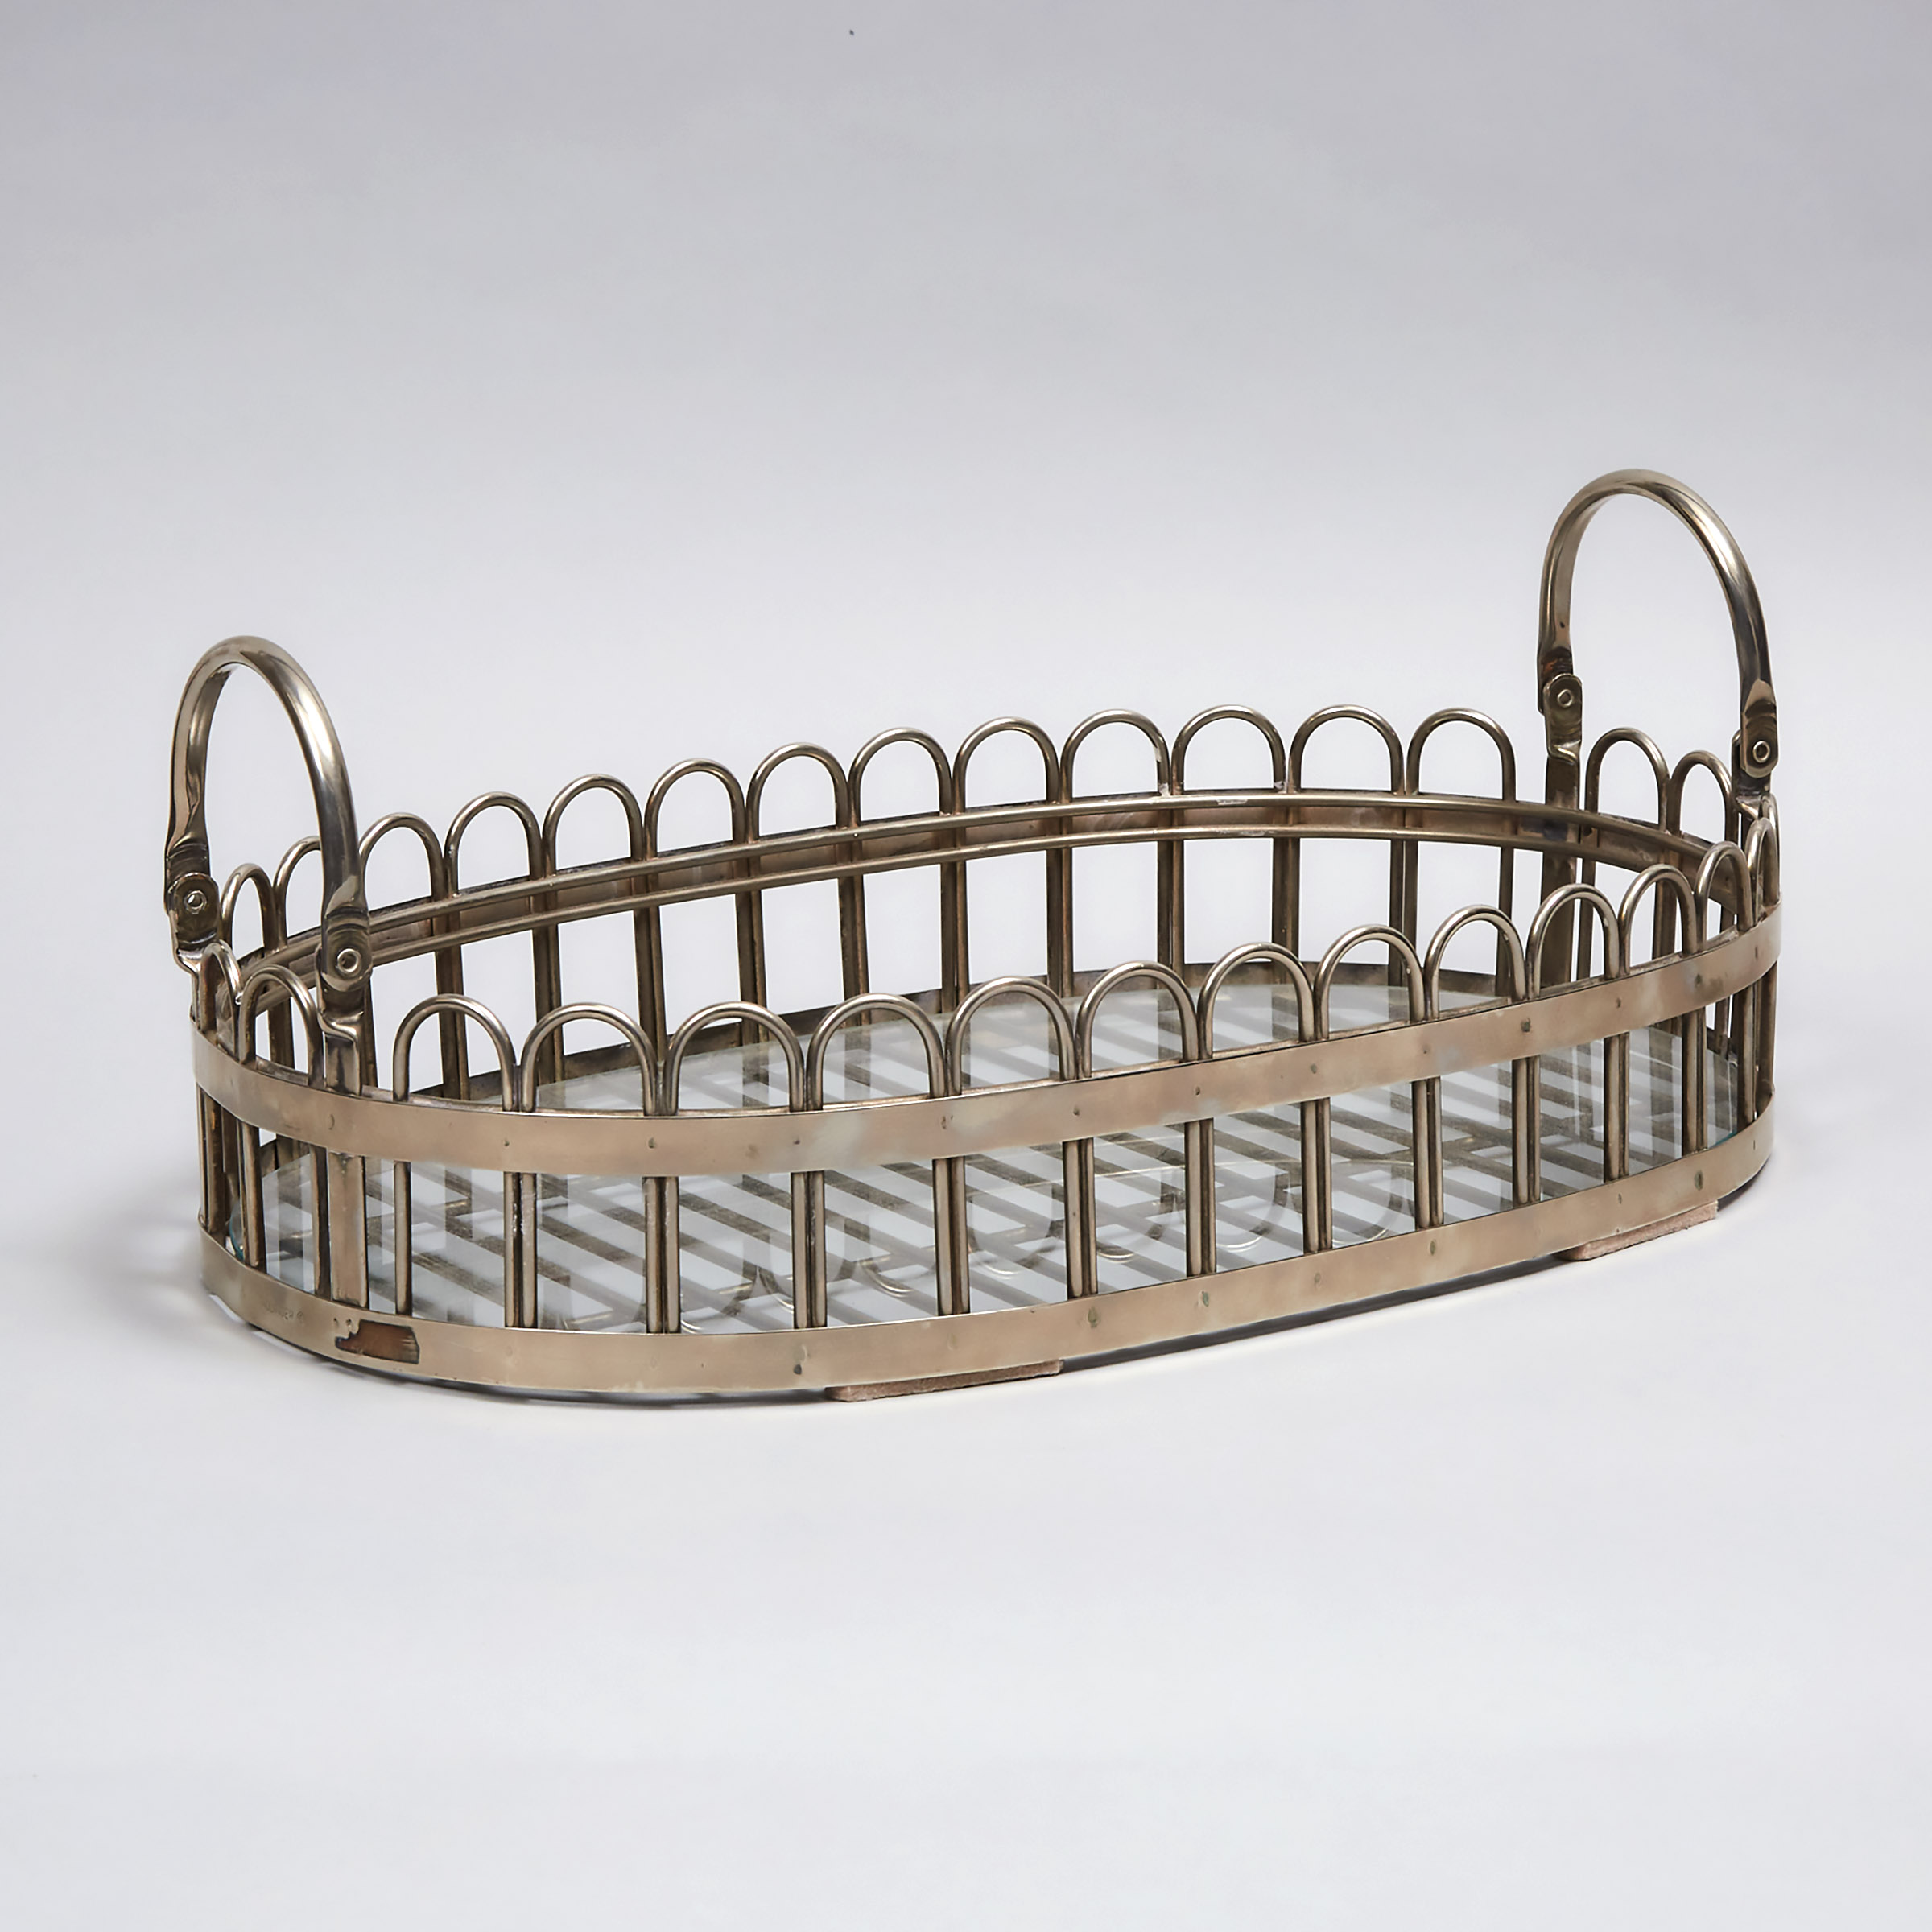 Godinger Nickel Plated and Glass Oval Galleried Serving Tray, late 20th century